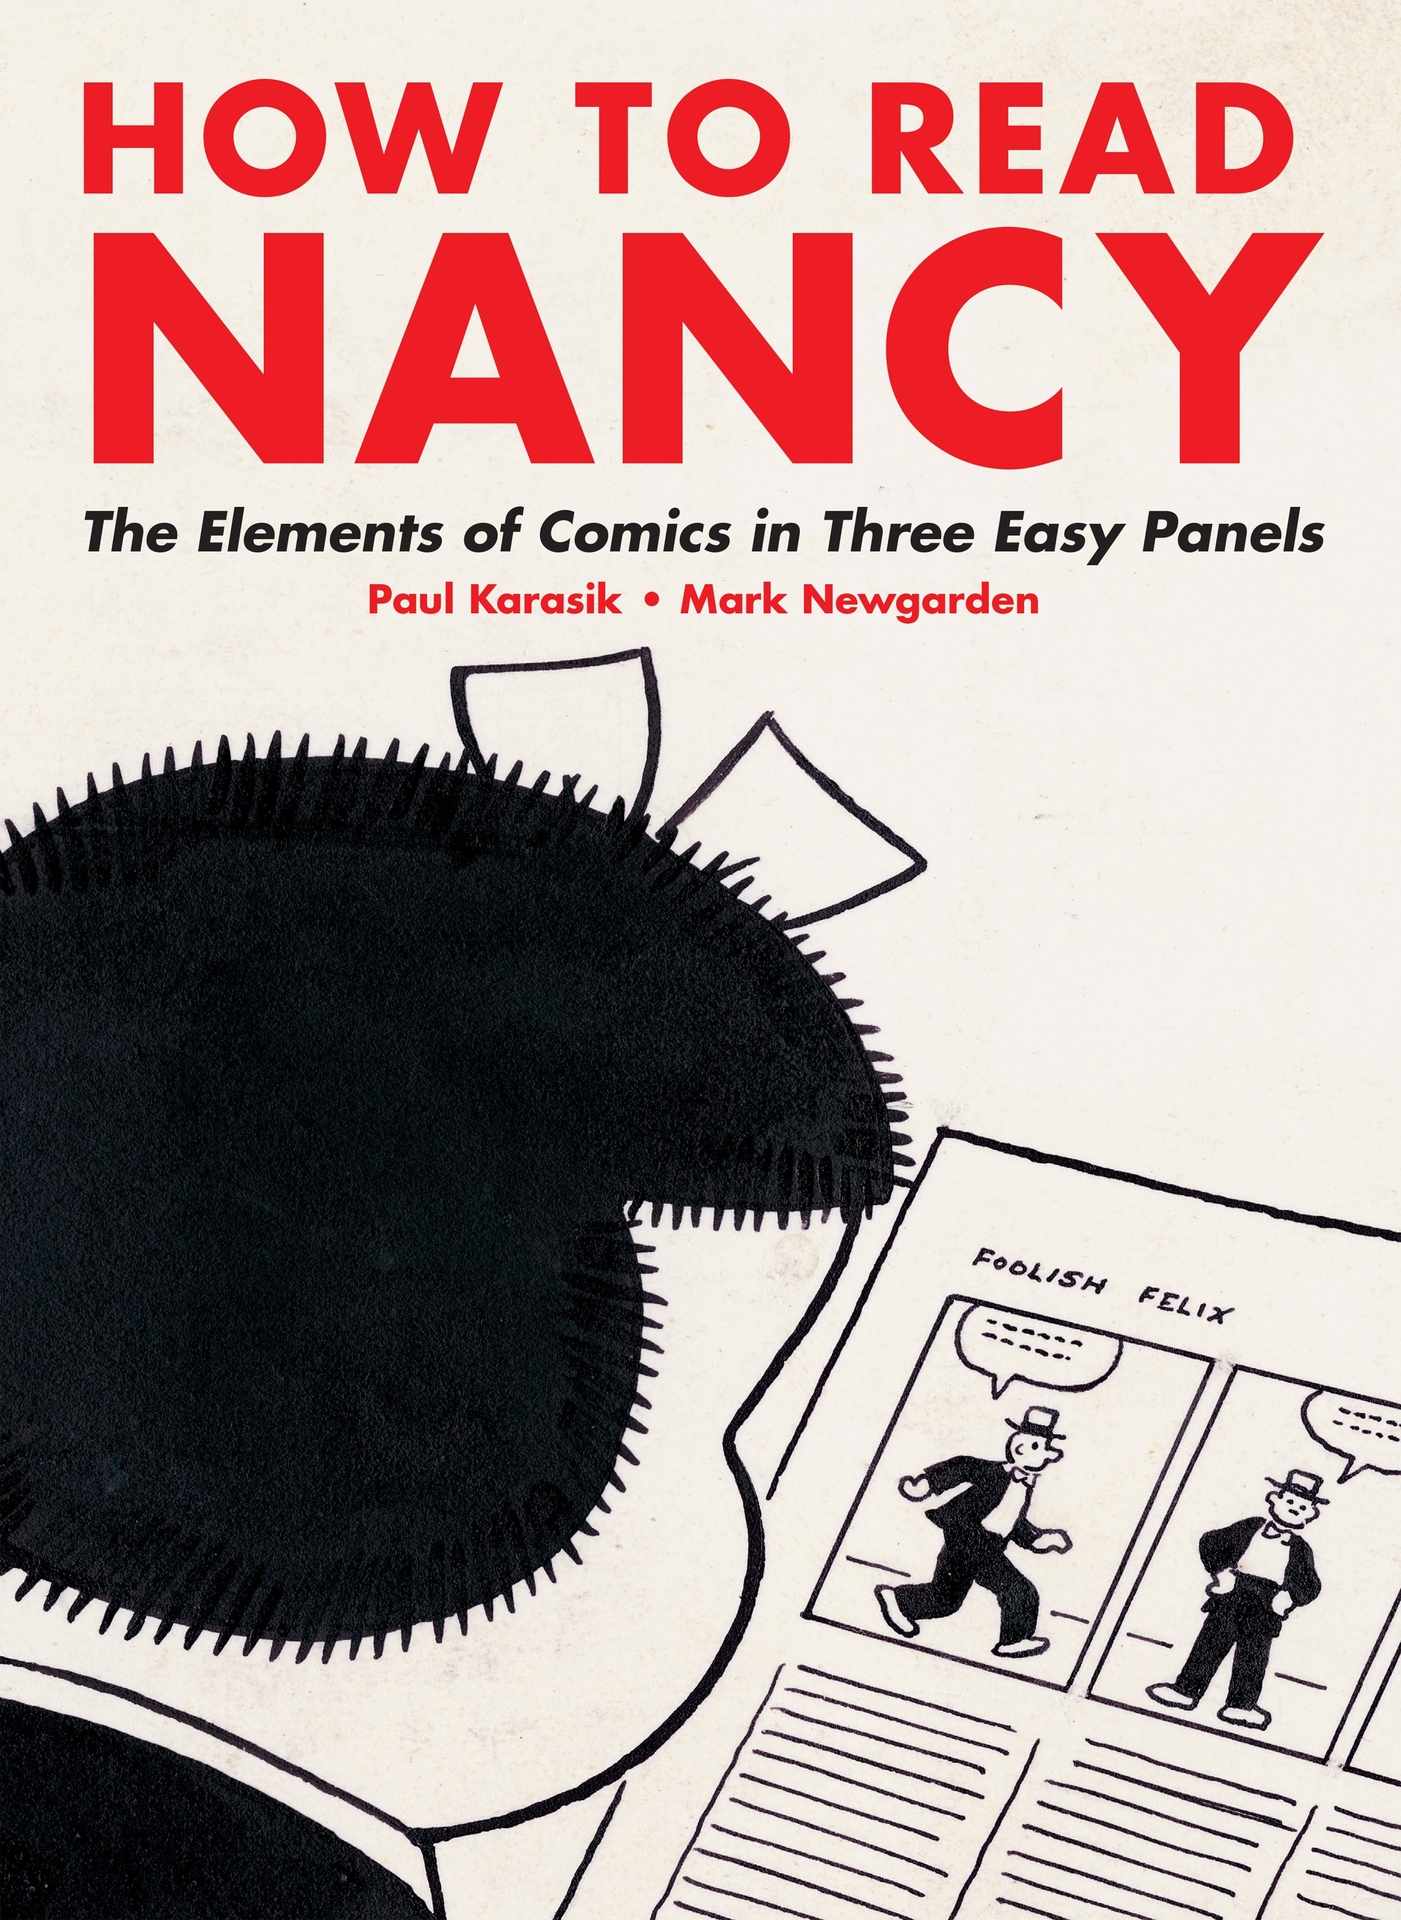 How to Read Nancy: The Elements of Comics in Three Easy Panels book cover